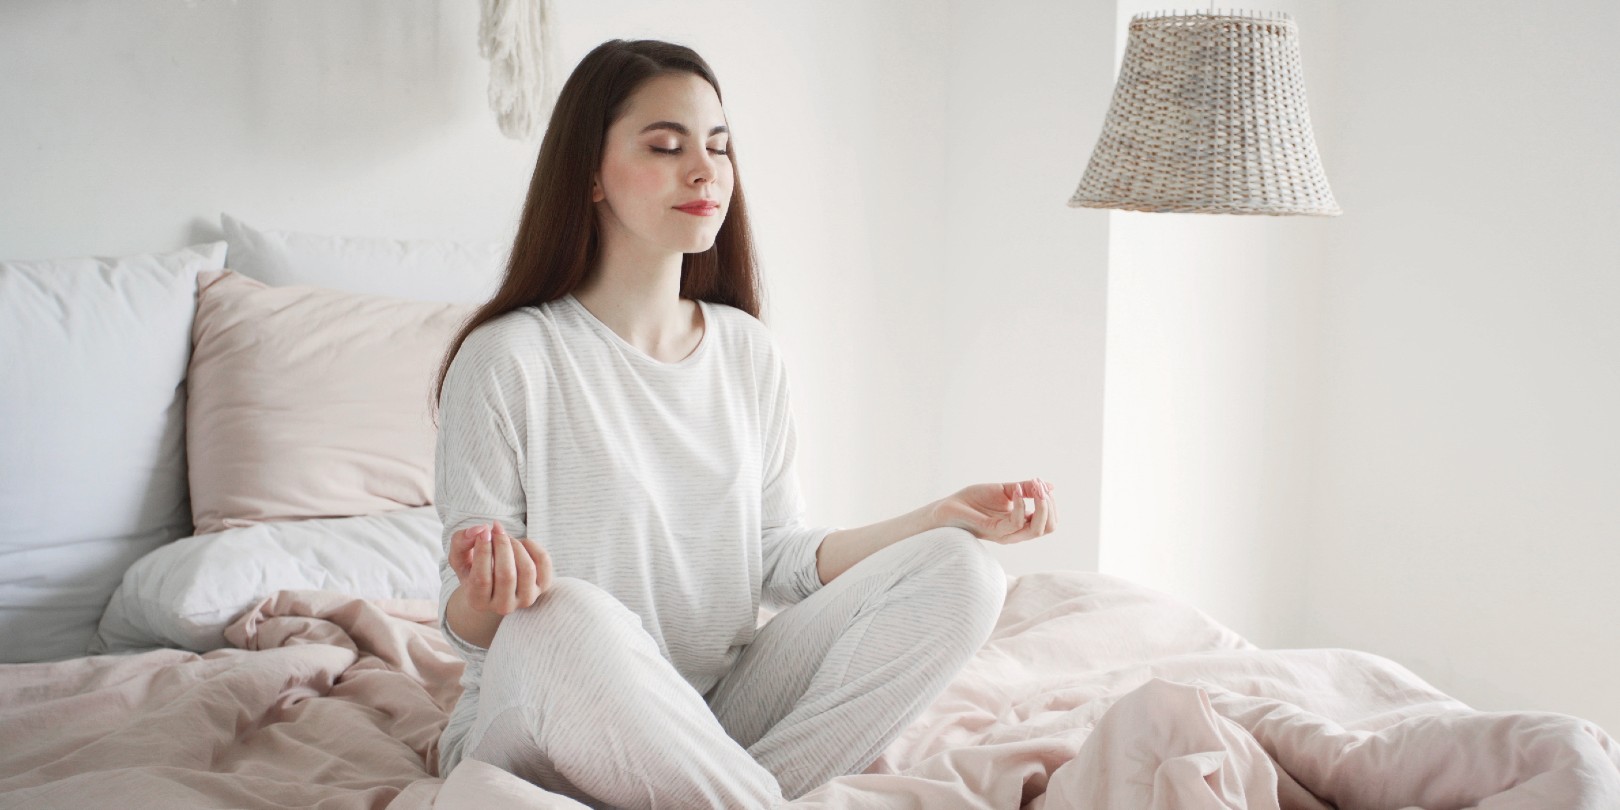 Calm and dreamy young woman in pajamas sitting at meditation pose on bed in cozy bedroom